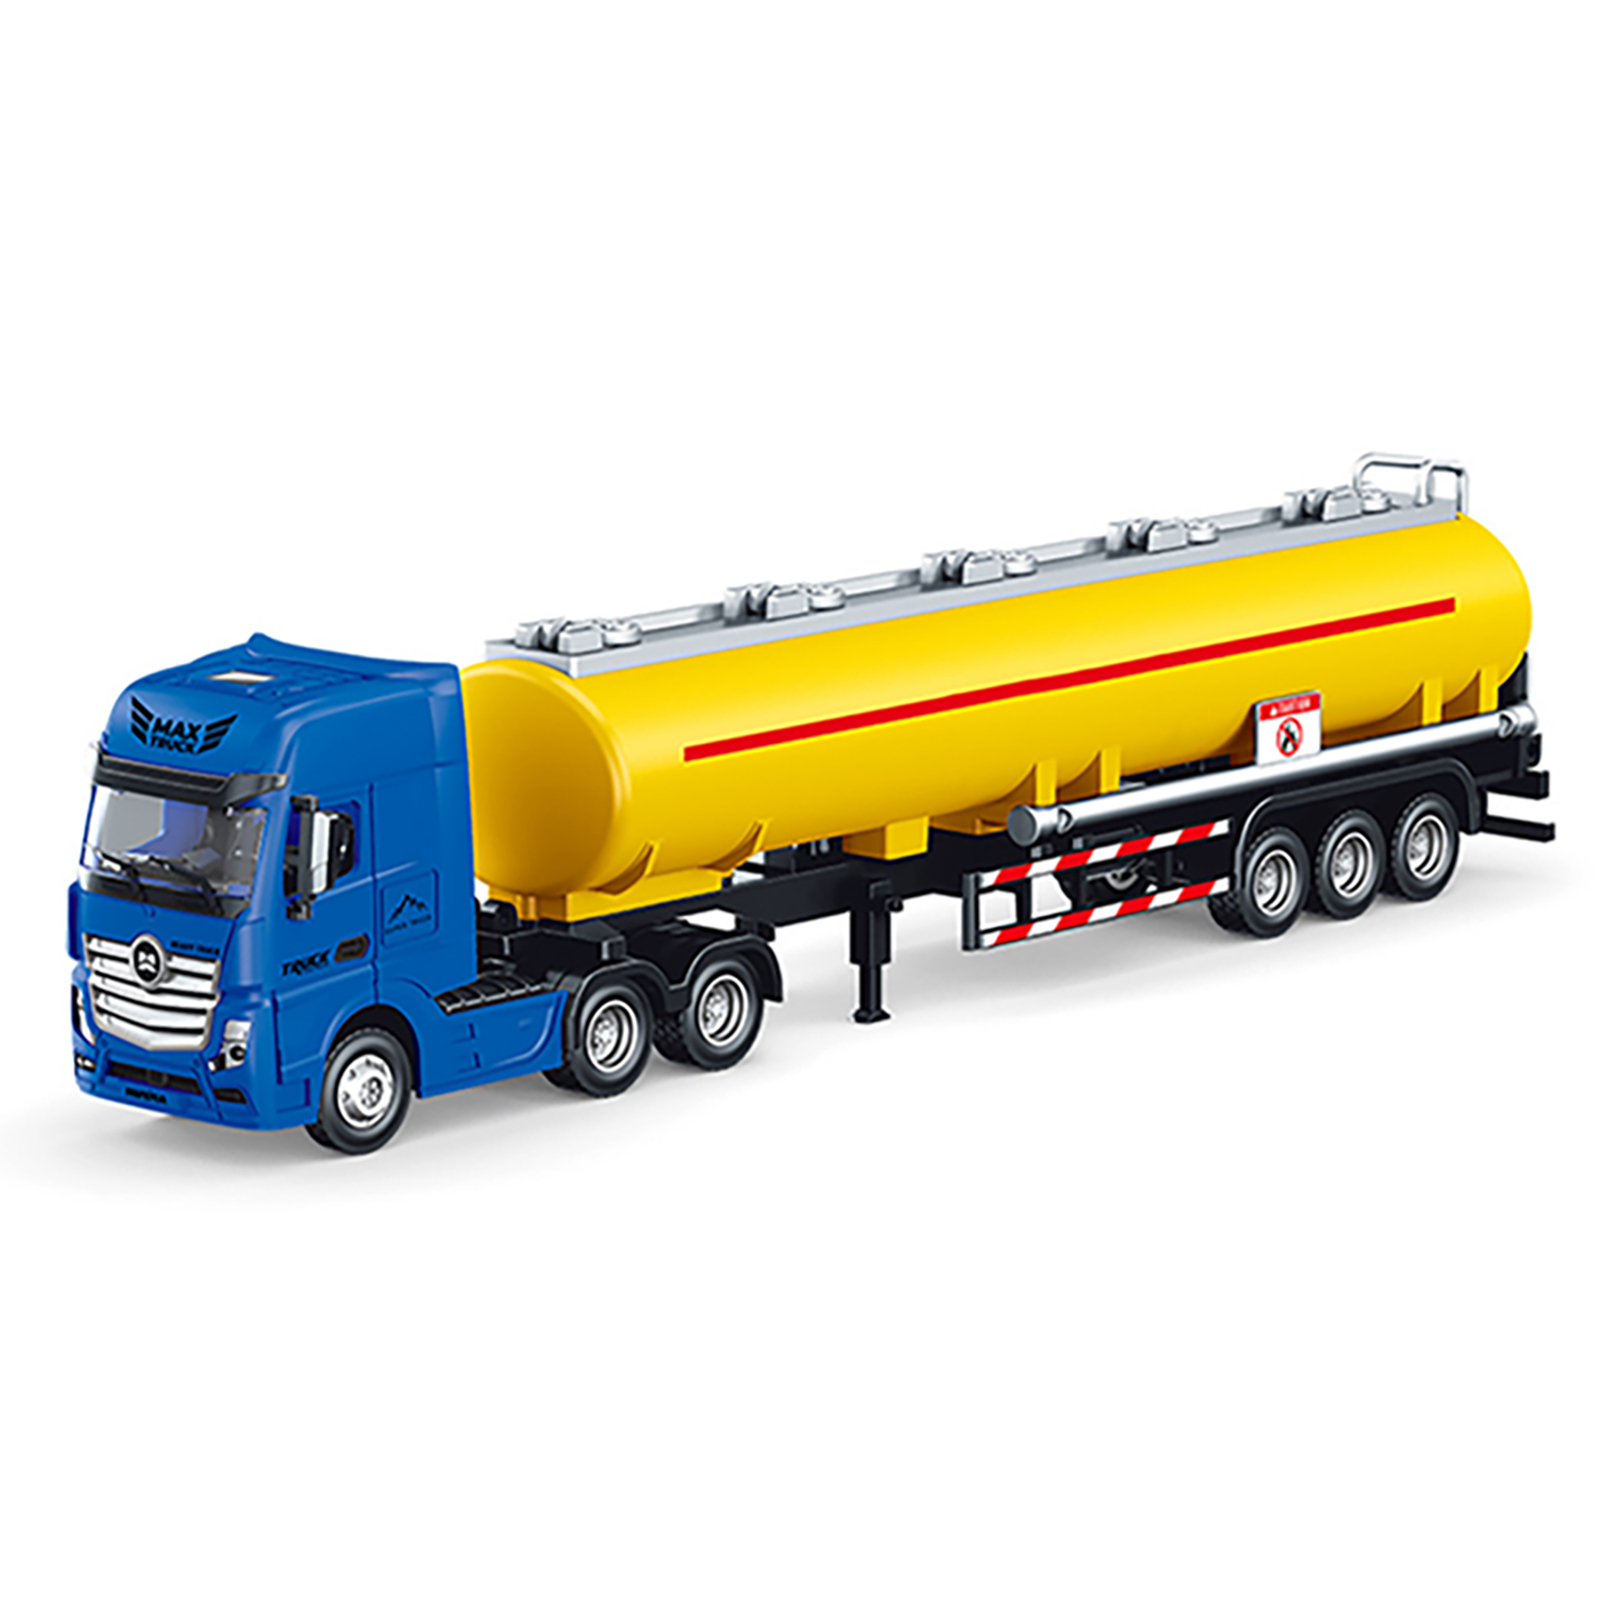 Huina 1:50 Engineering Vehicle Toys Children Flatbed Trailer Oil Tanker Model Ornaments For Boys Gifts 1730/1733